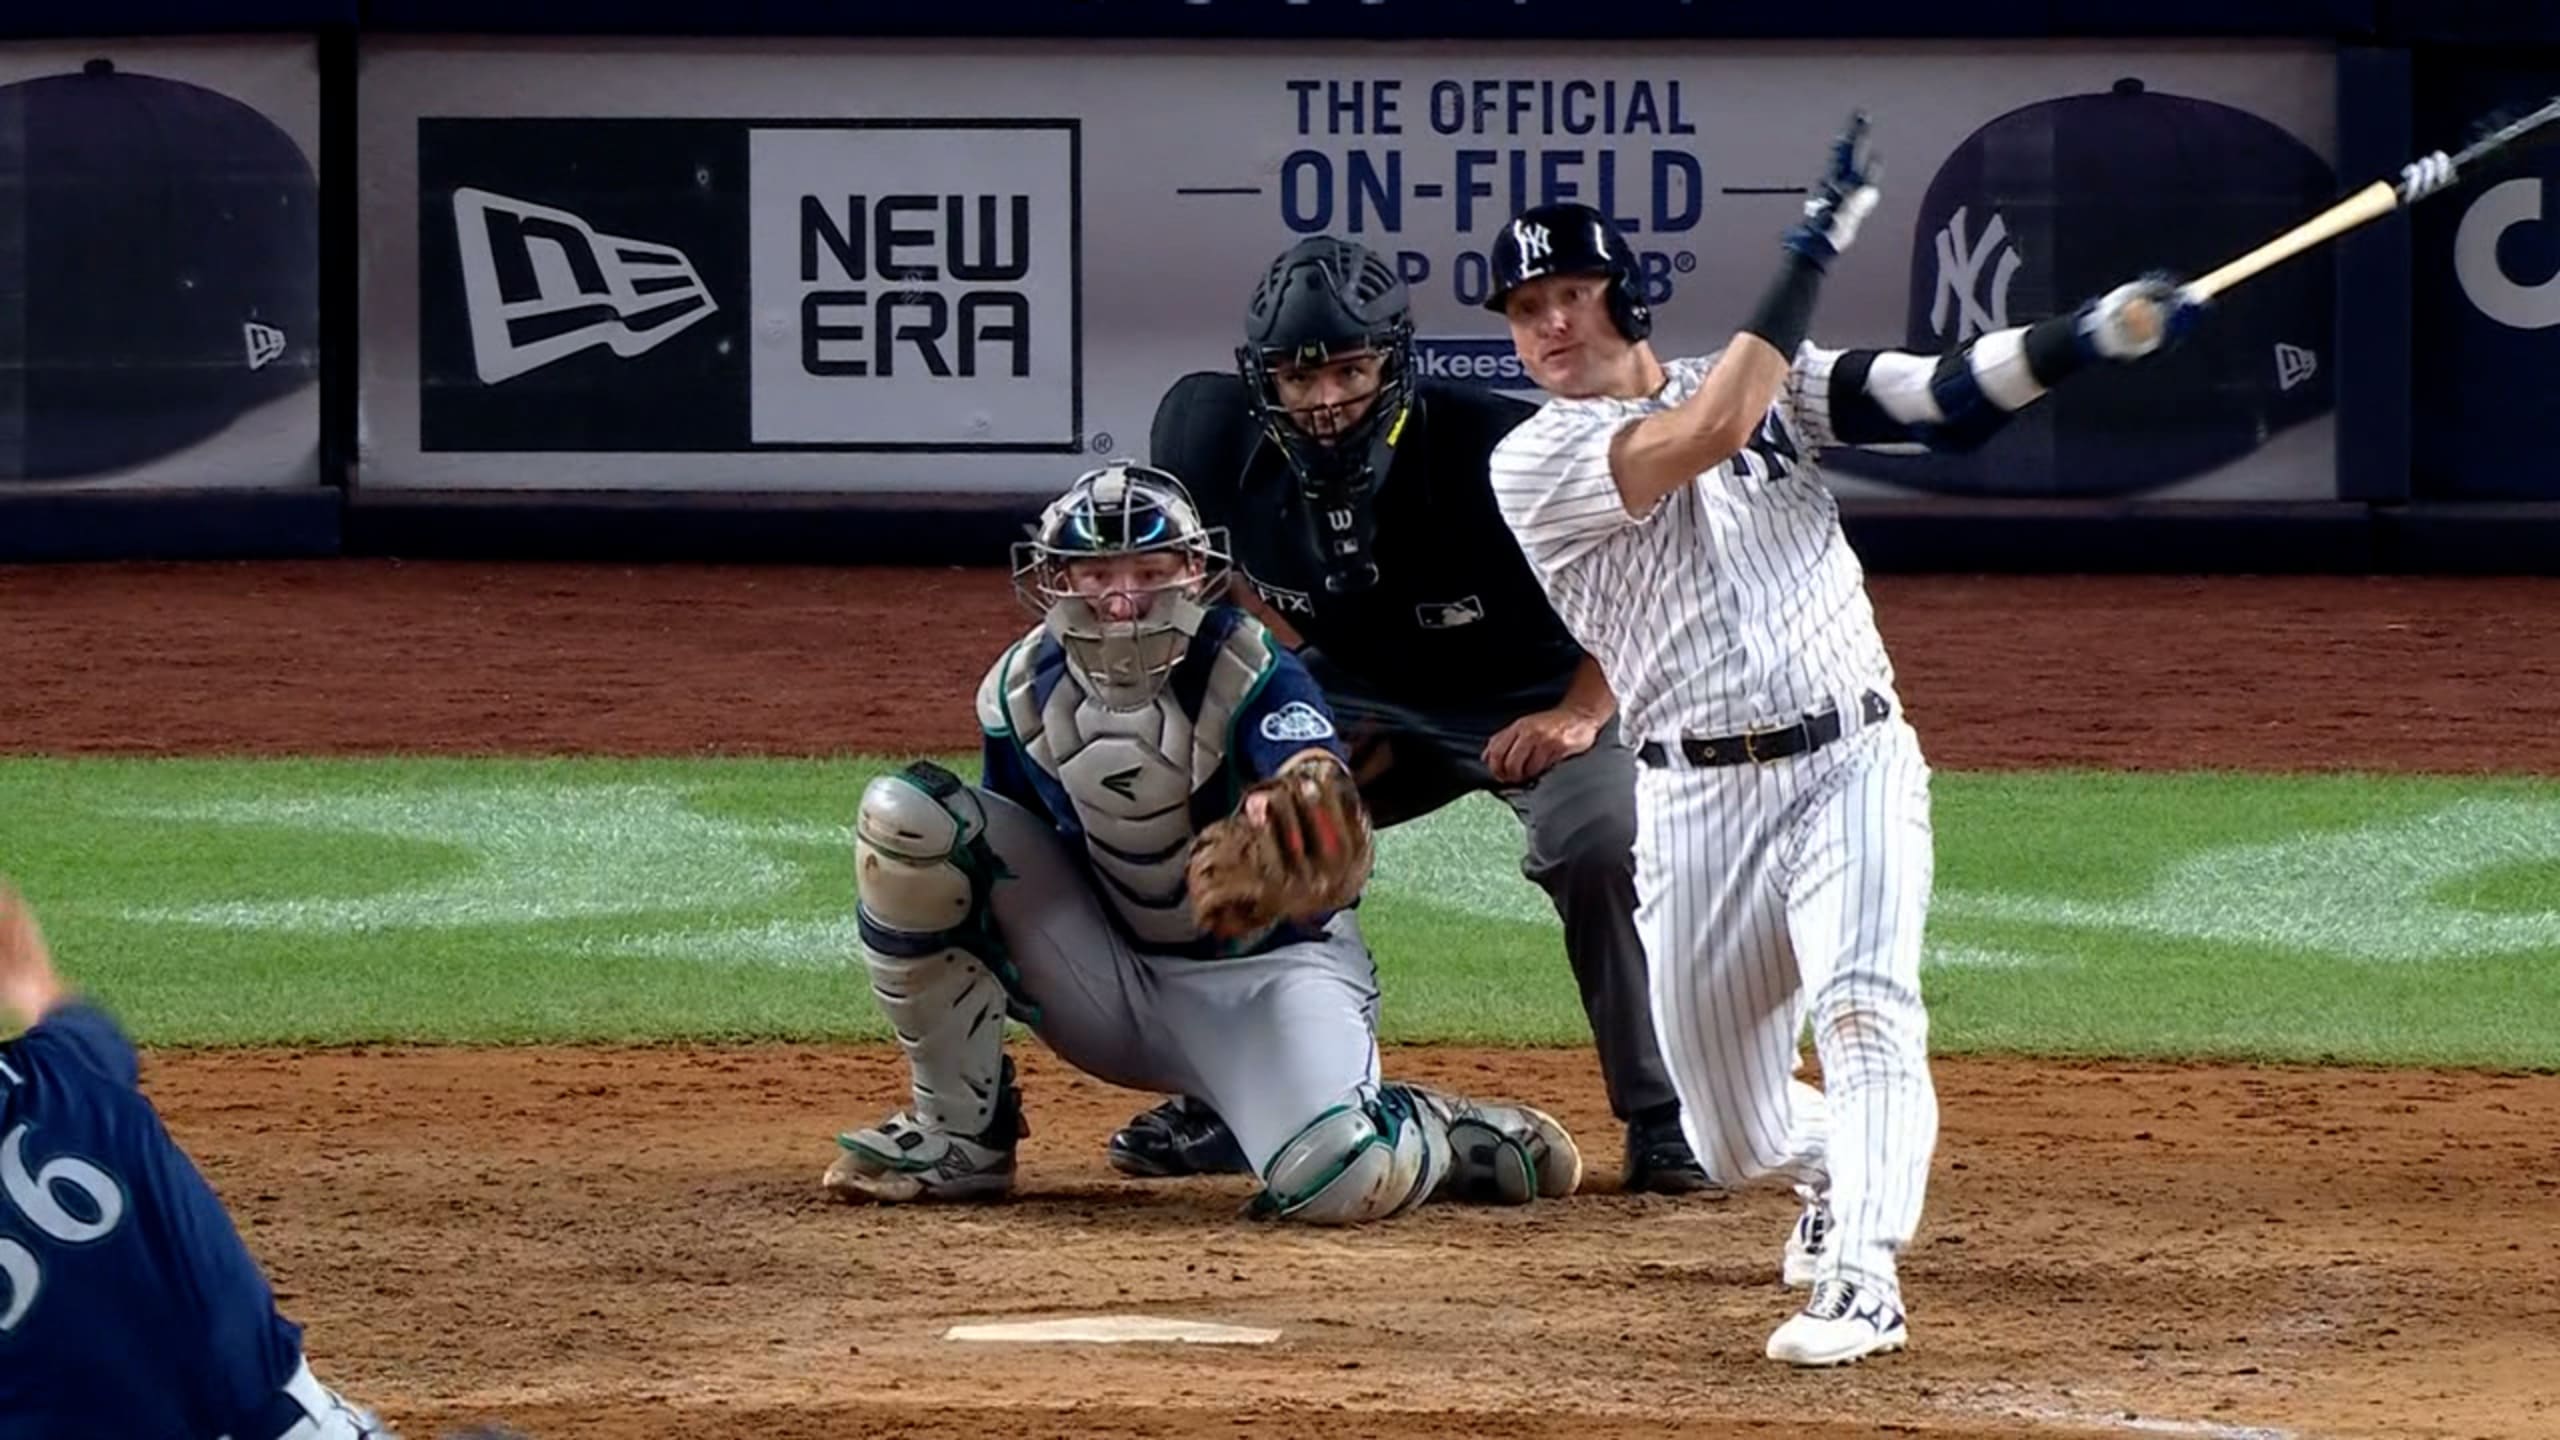 Yankees Lost Play-in Game Which Means They Never Really Made The Playoffs  And They Are A Joke – Turtleboy